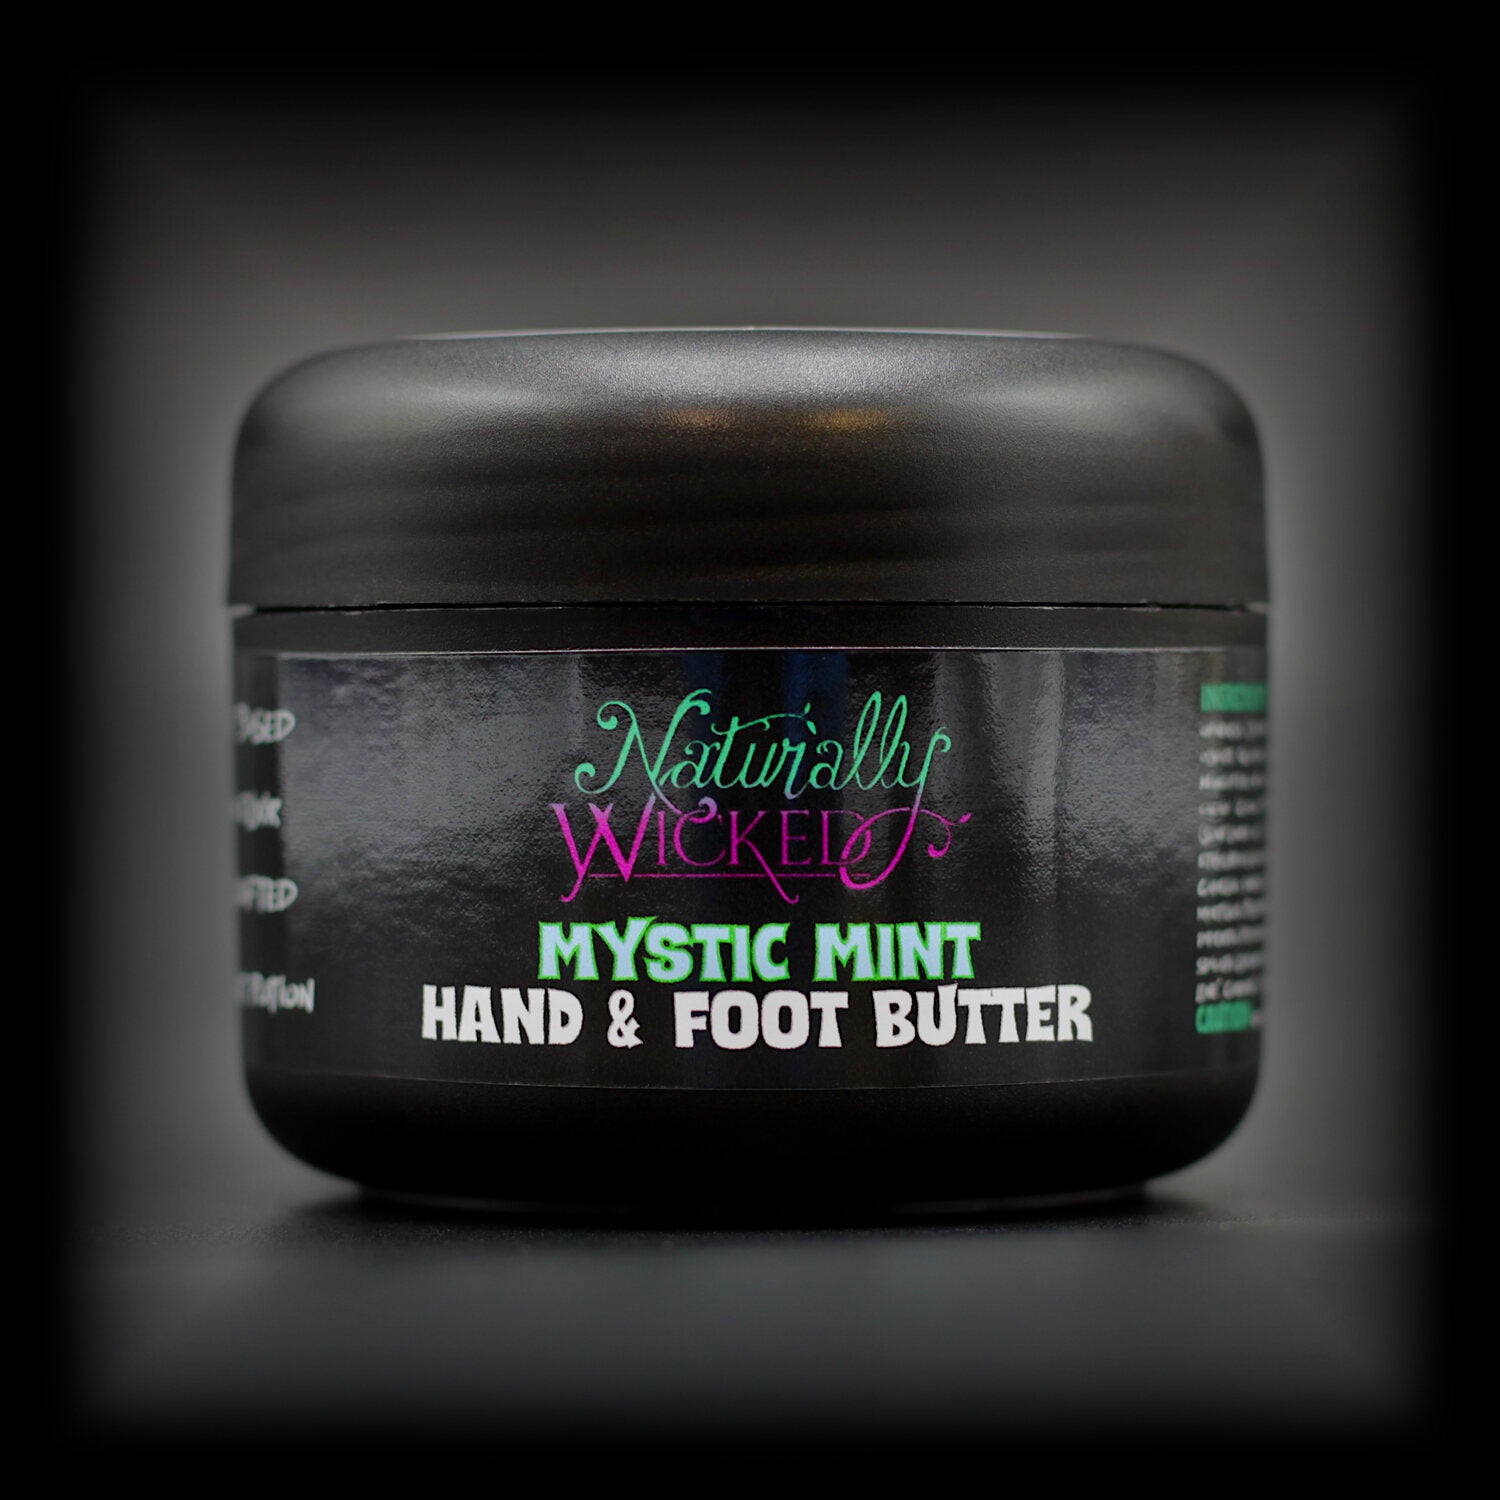 Naturally Wicked Mystic Mint Hand & Foot Butter In Luxury Rounded Black Container